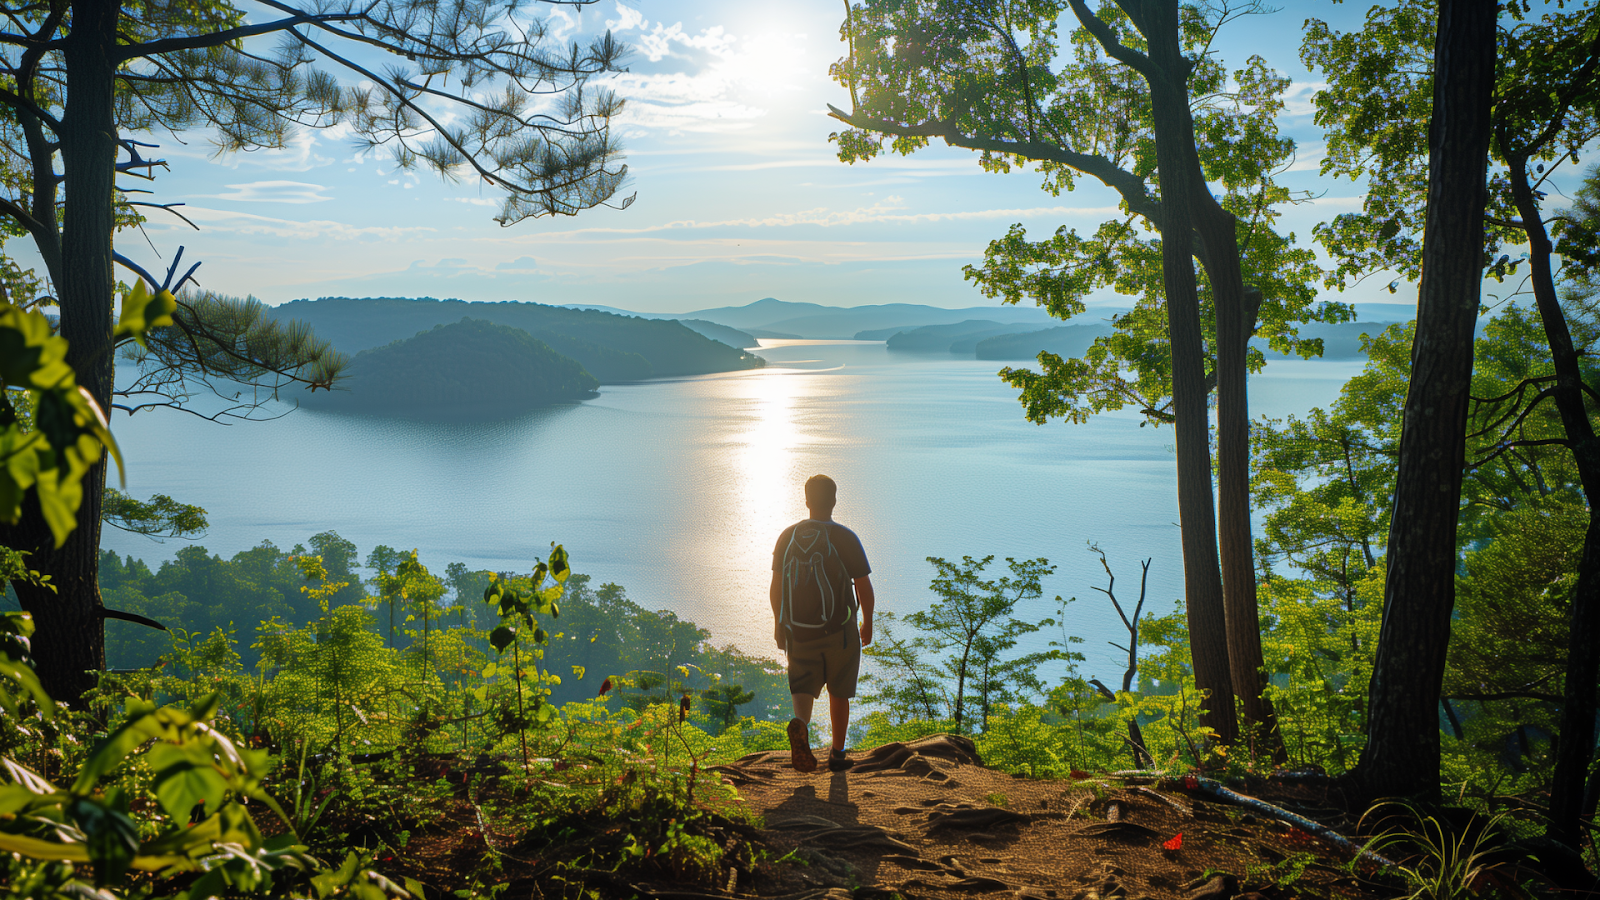 Hiker overlooking Lake Lanier and the Appalachian foothills at sunrise.